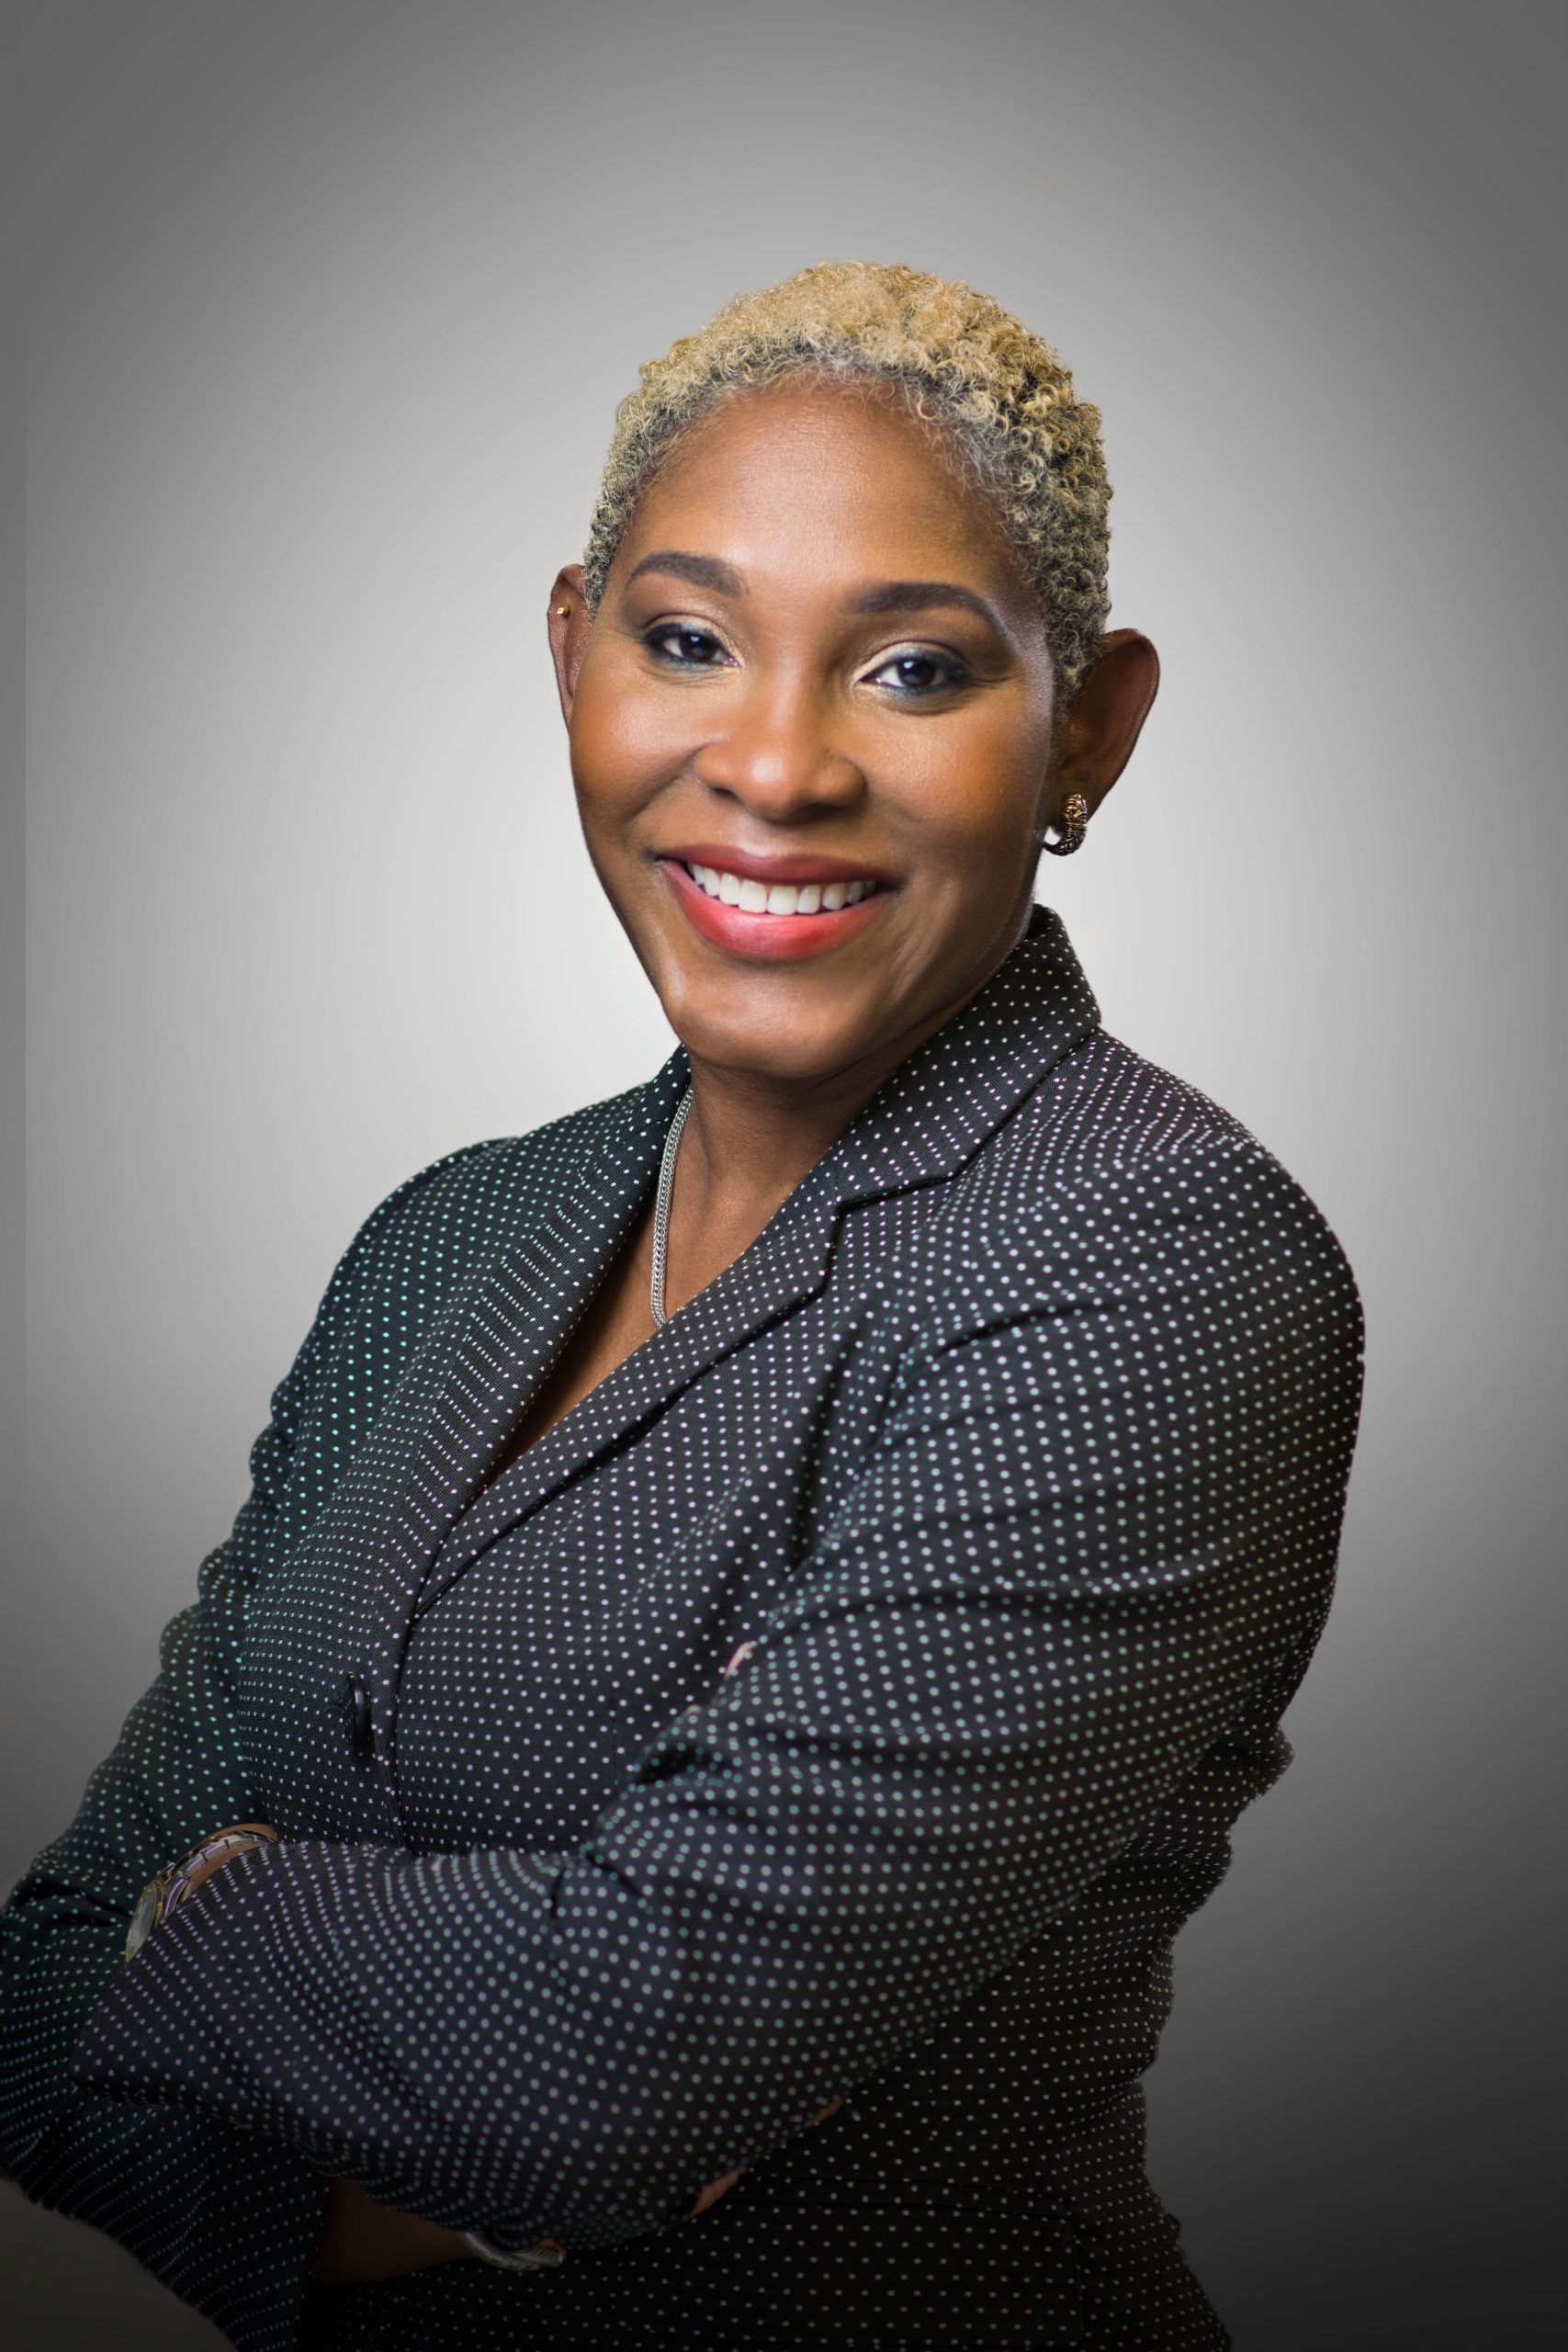 Marilyn Sealy is Flow’s new Senior Director, Head of Communications